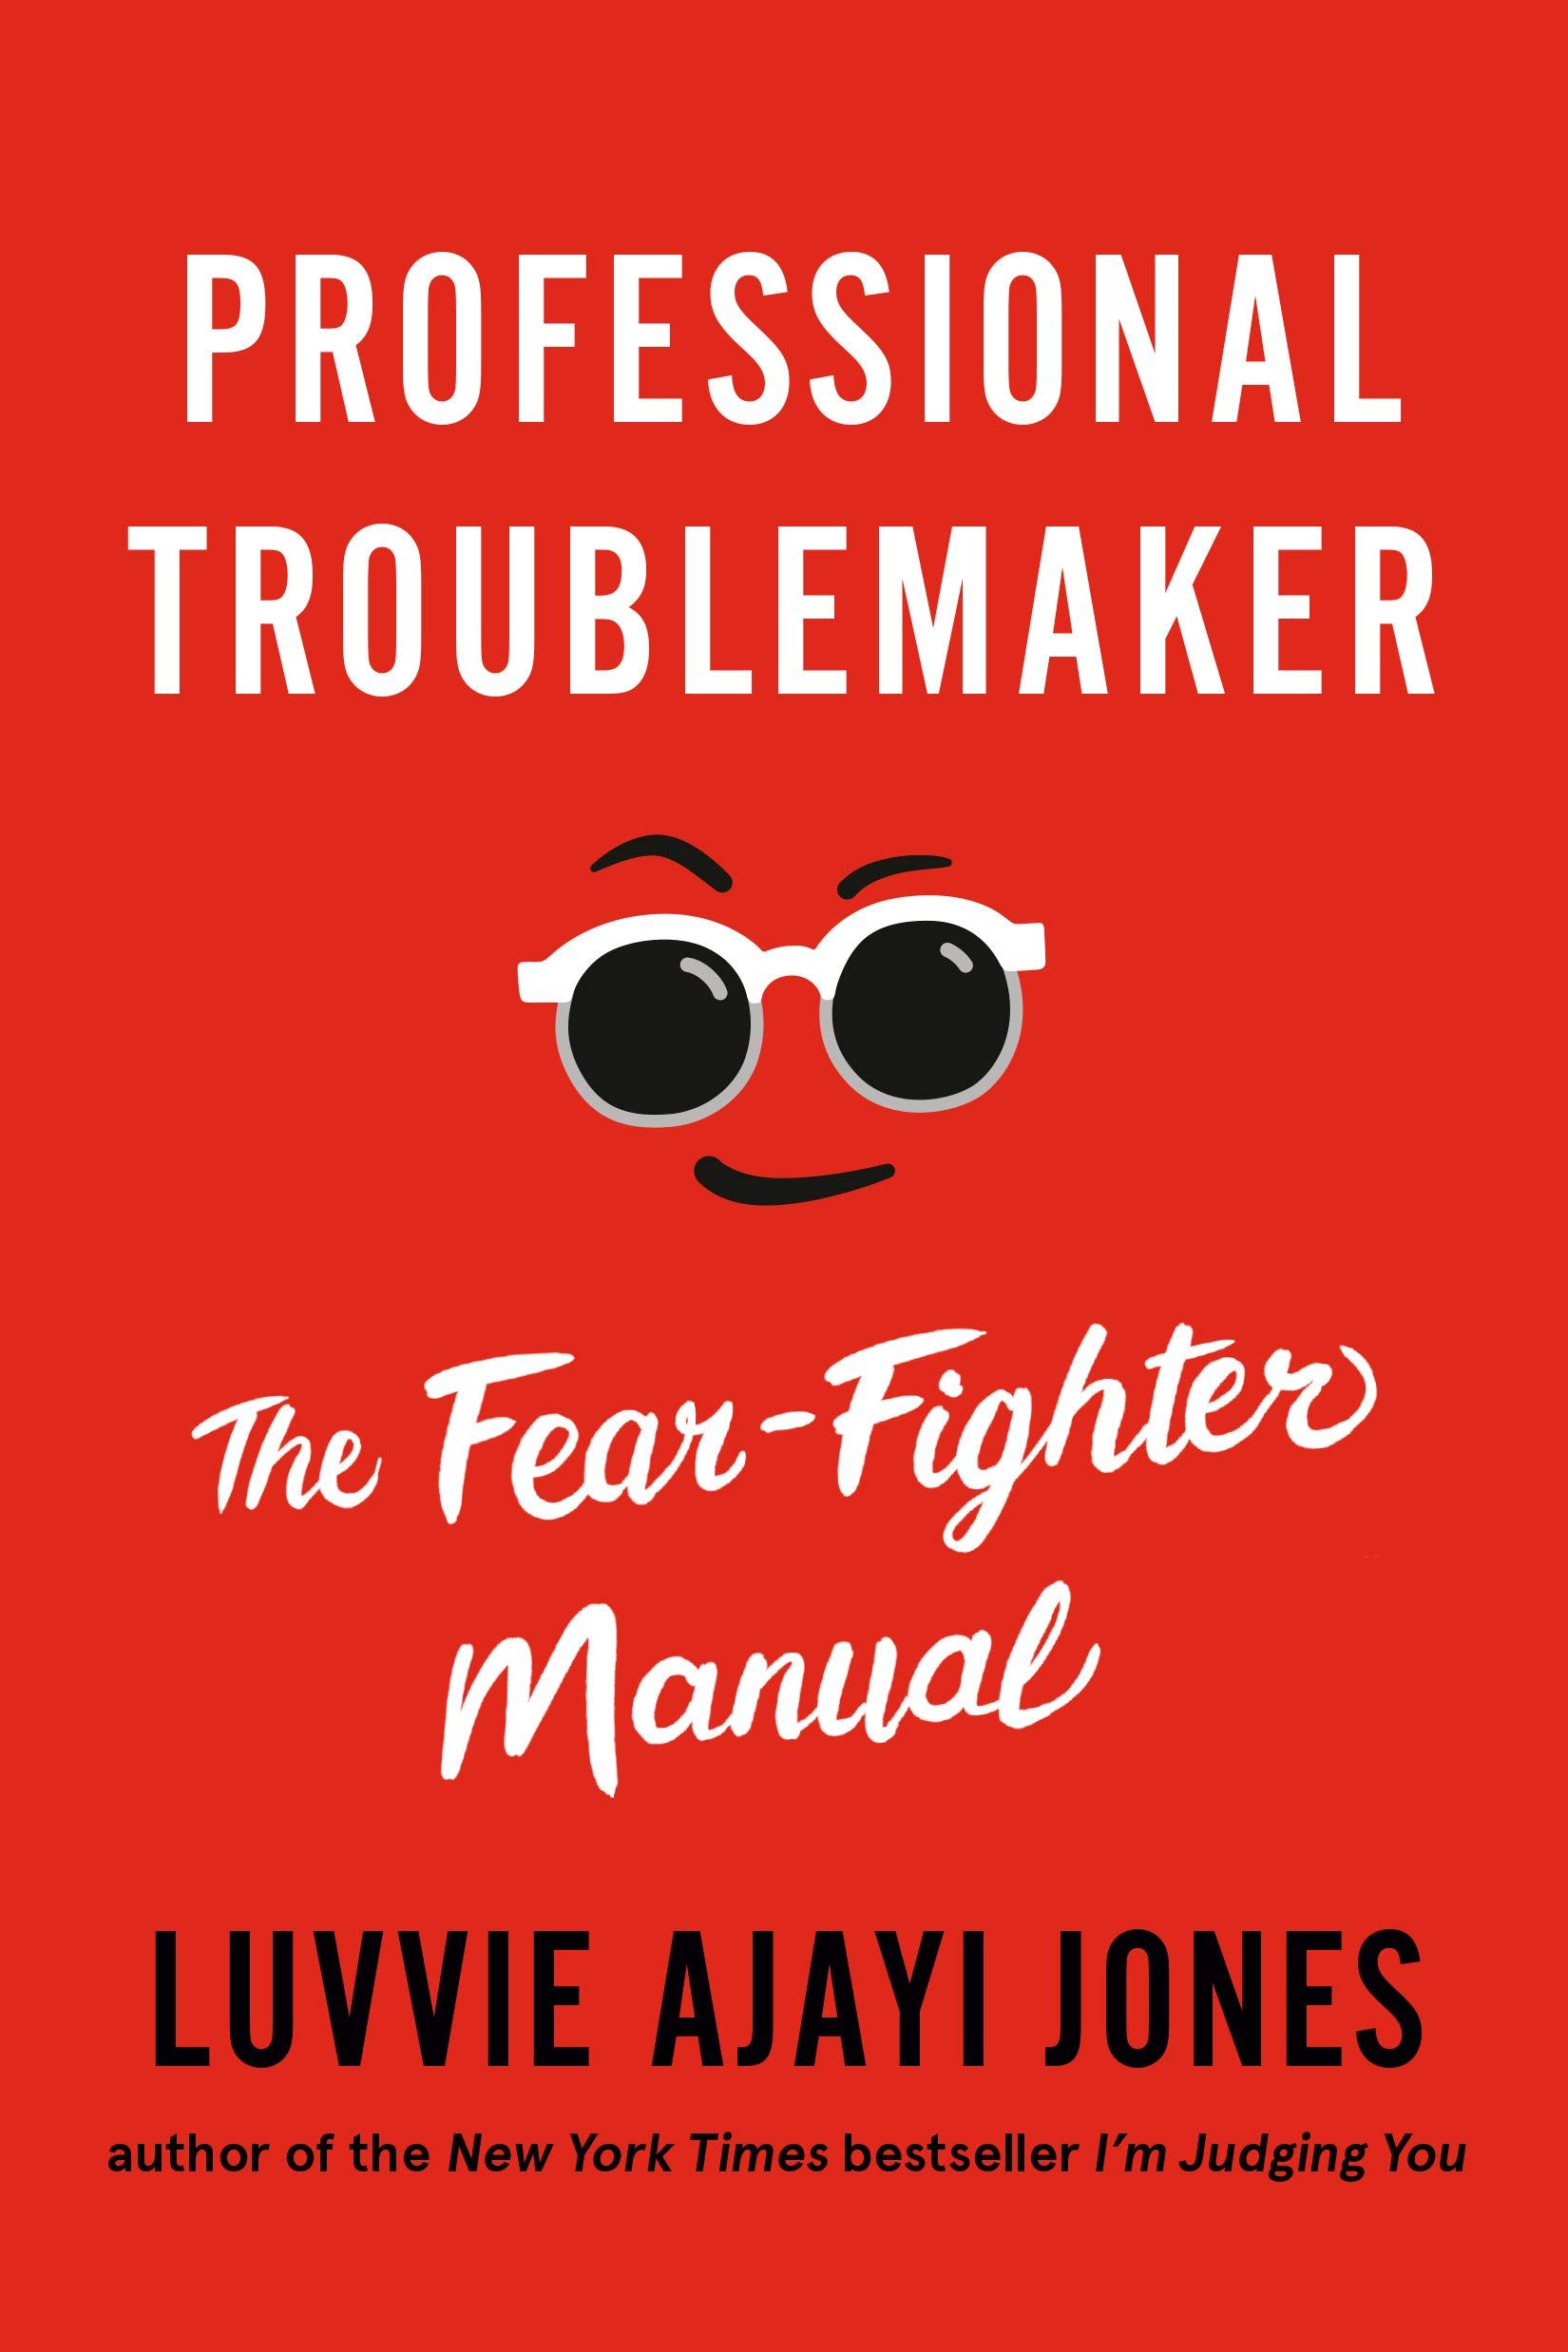 Cover of Professional Troublemaker by Luvvie Ajayi Jones